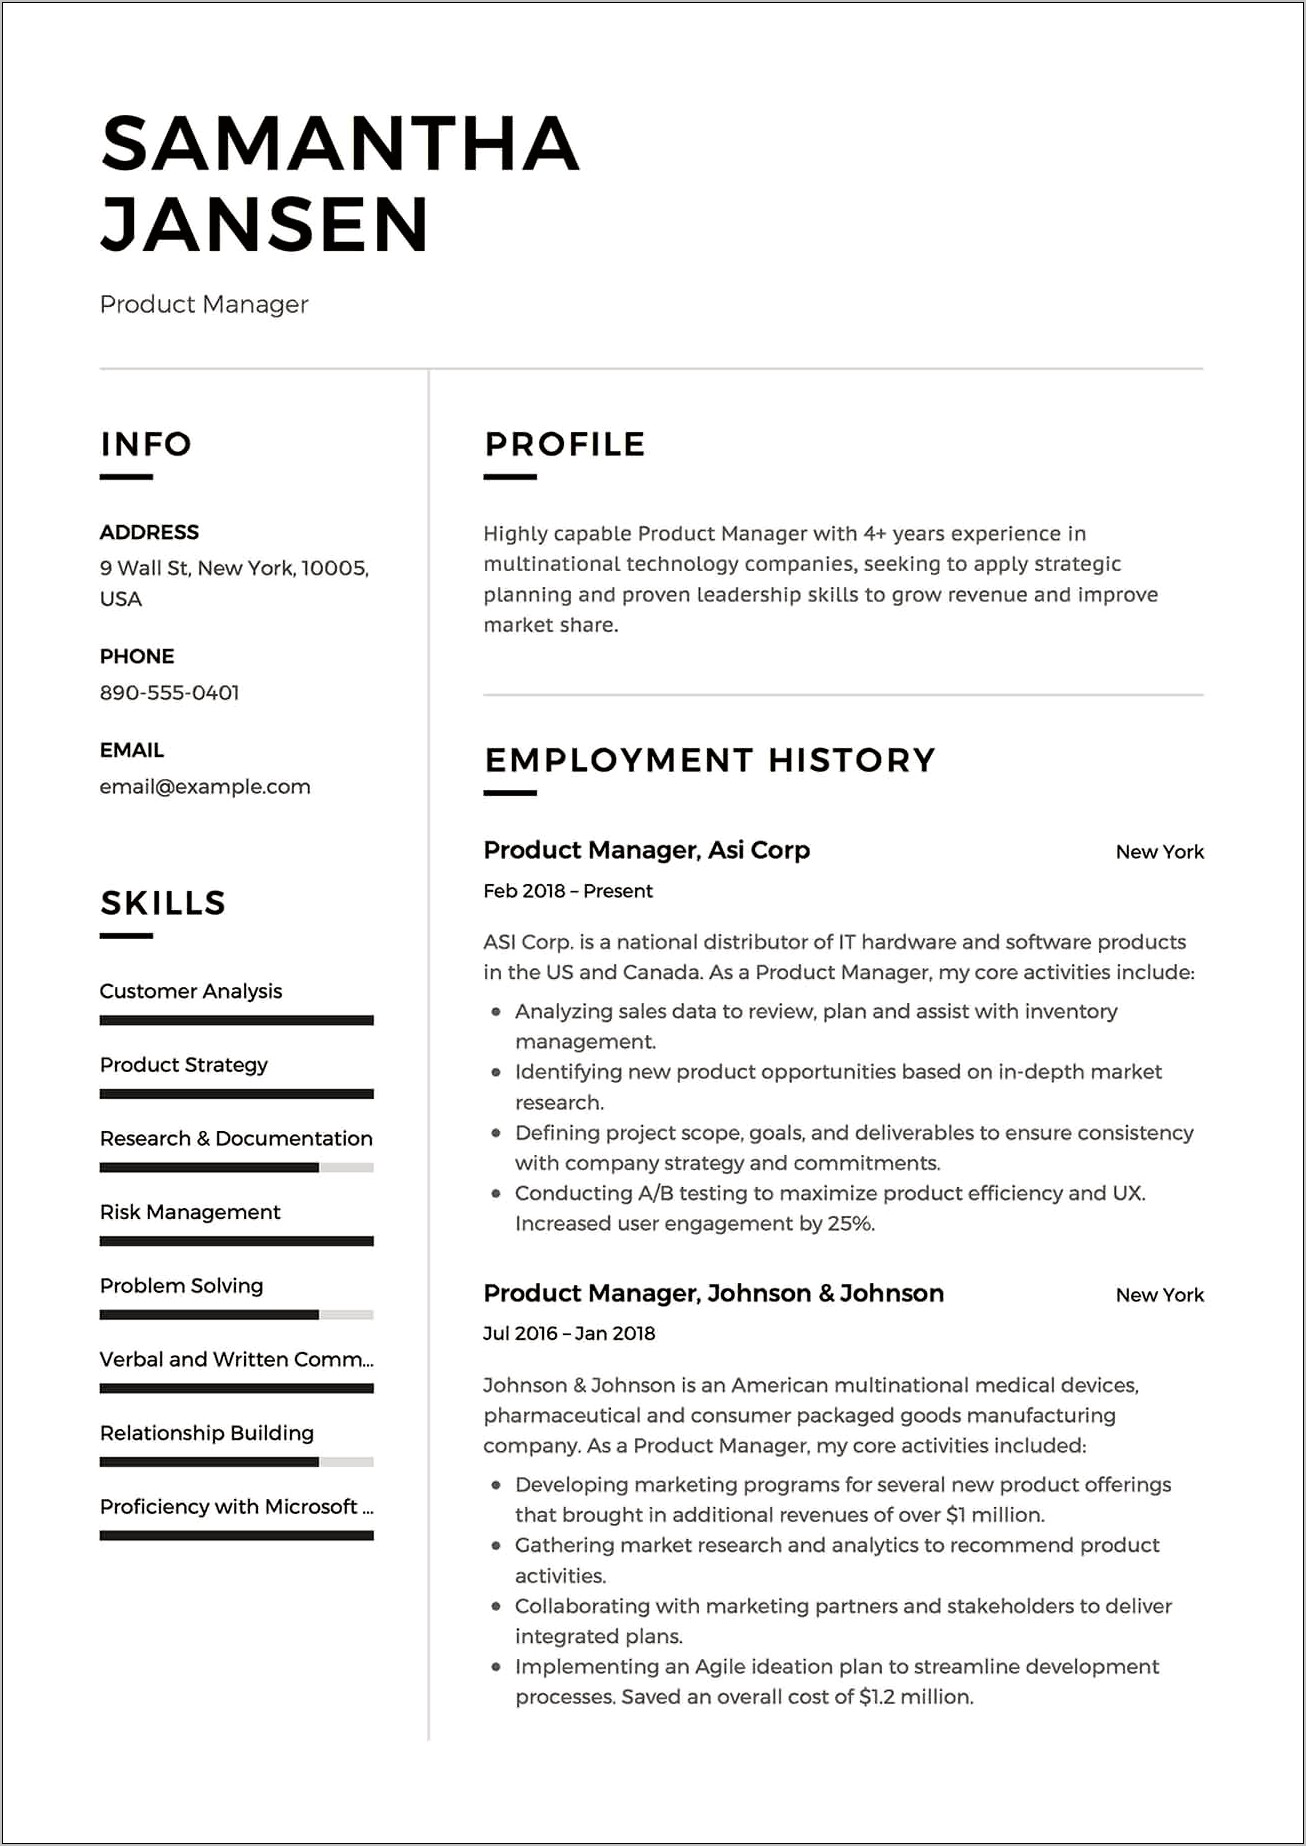 Resume Organize Experience By Start Or End Date